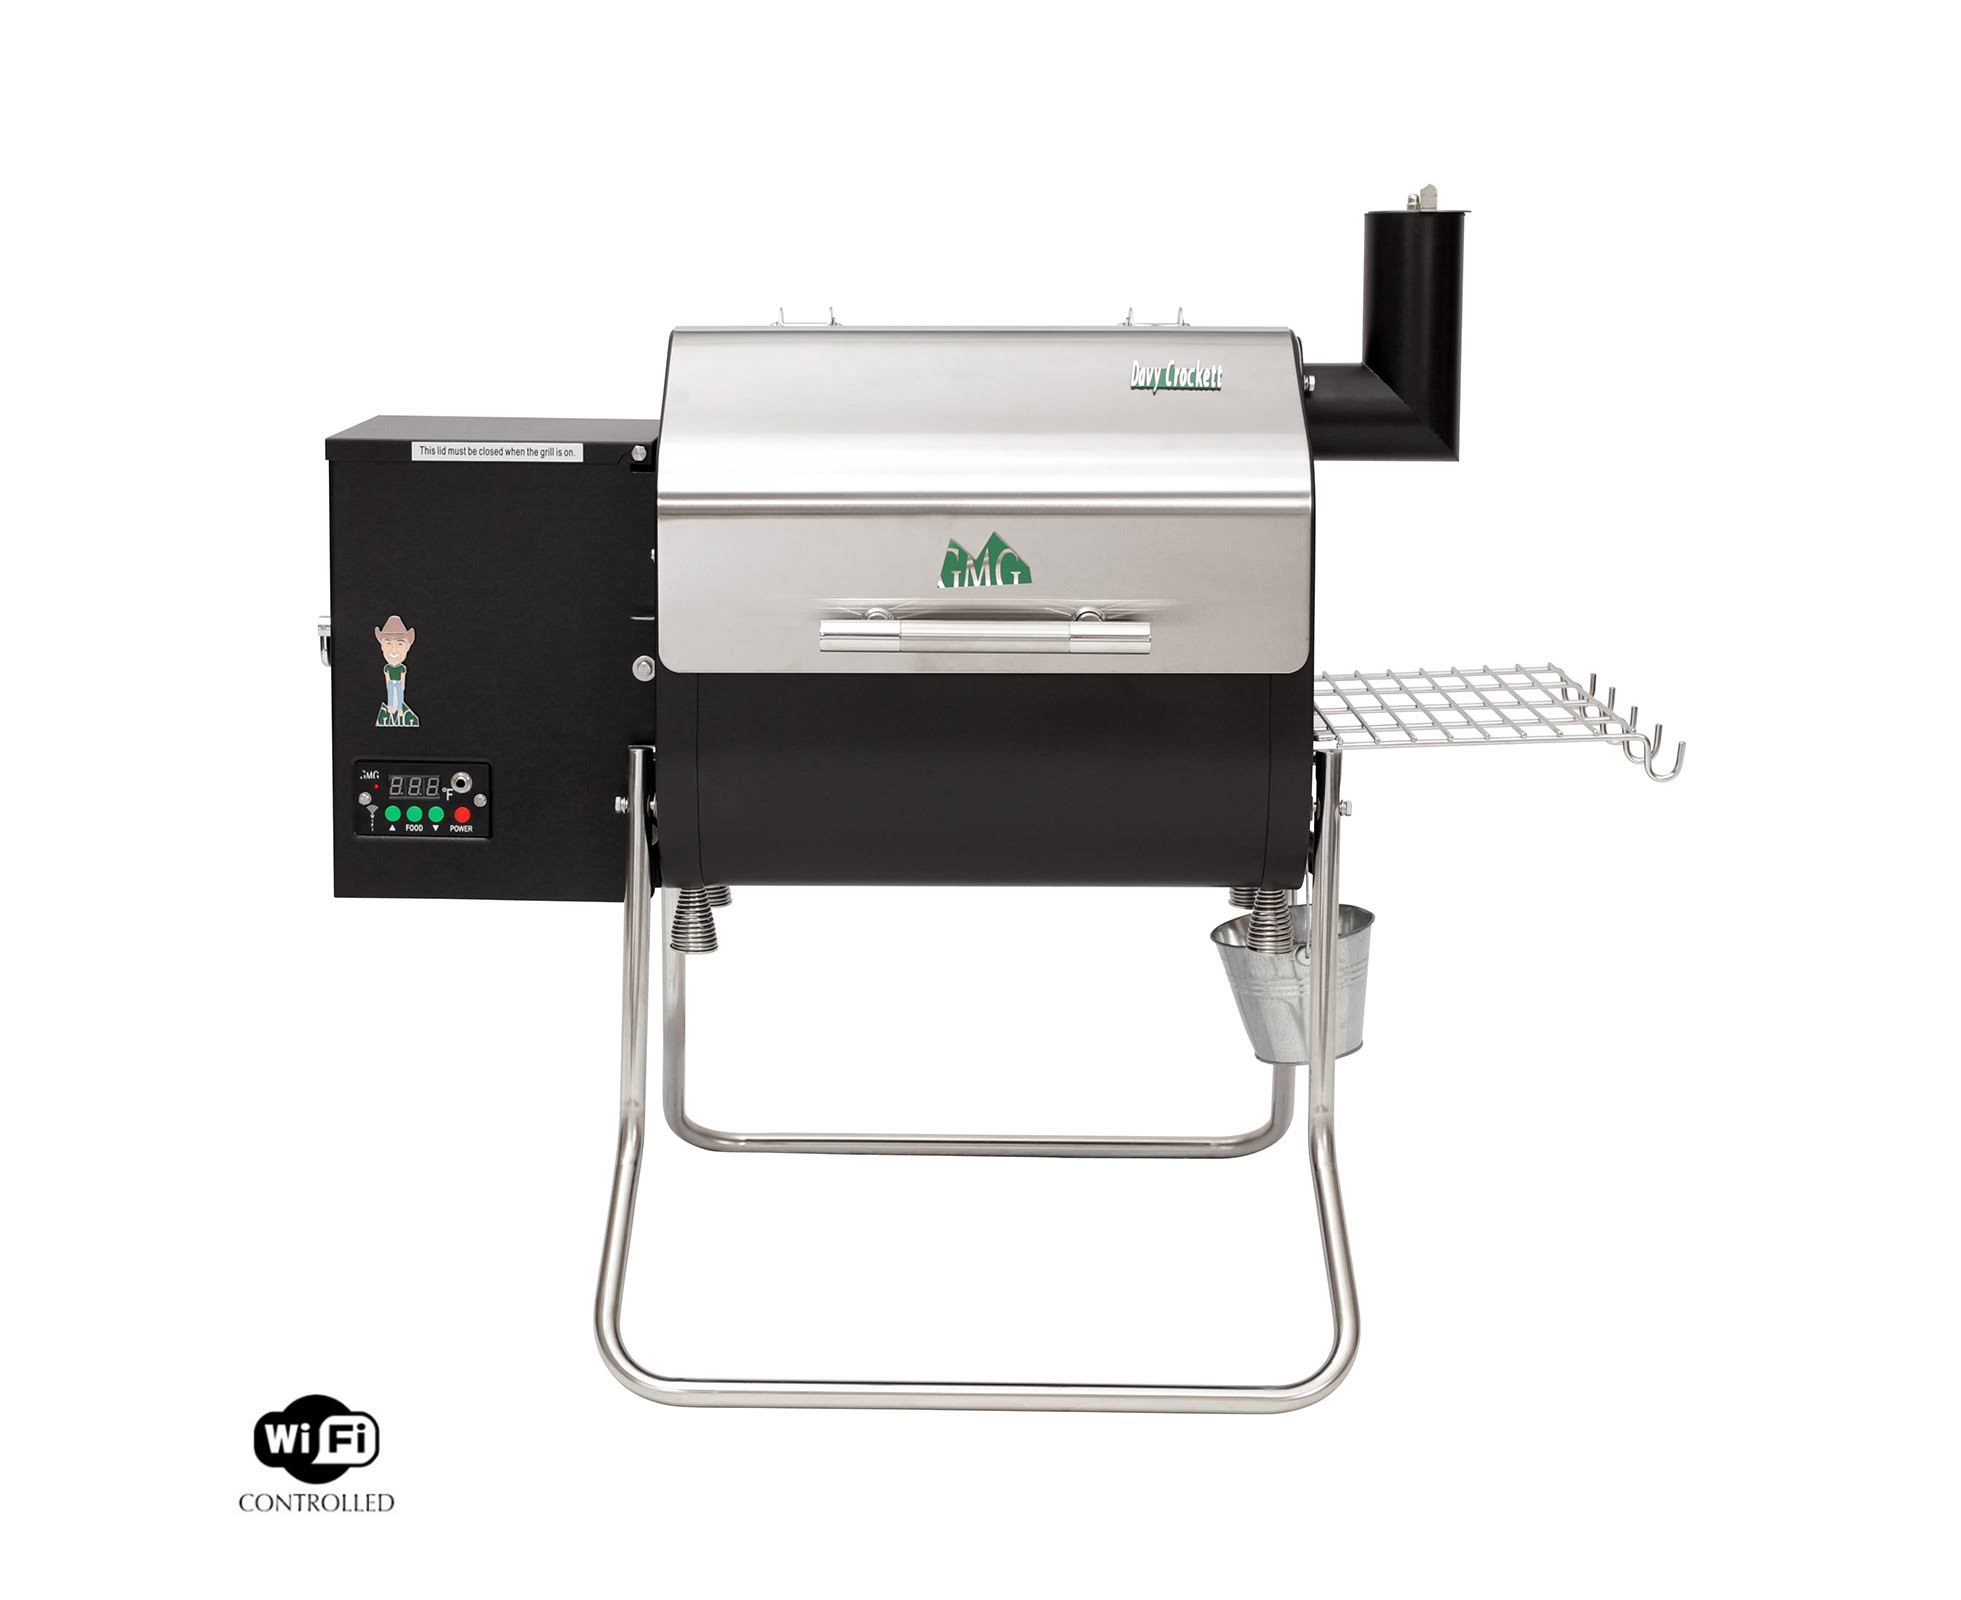 Green Mountain Grills GMG Davy Crockett Wood Pellet Barbecue Grill